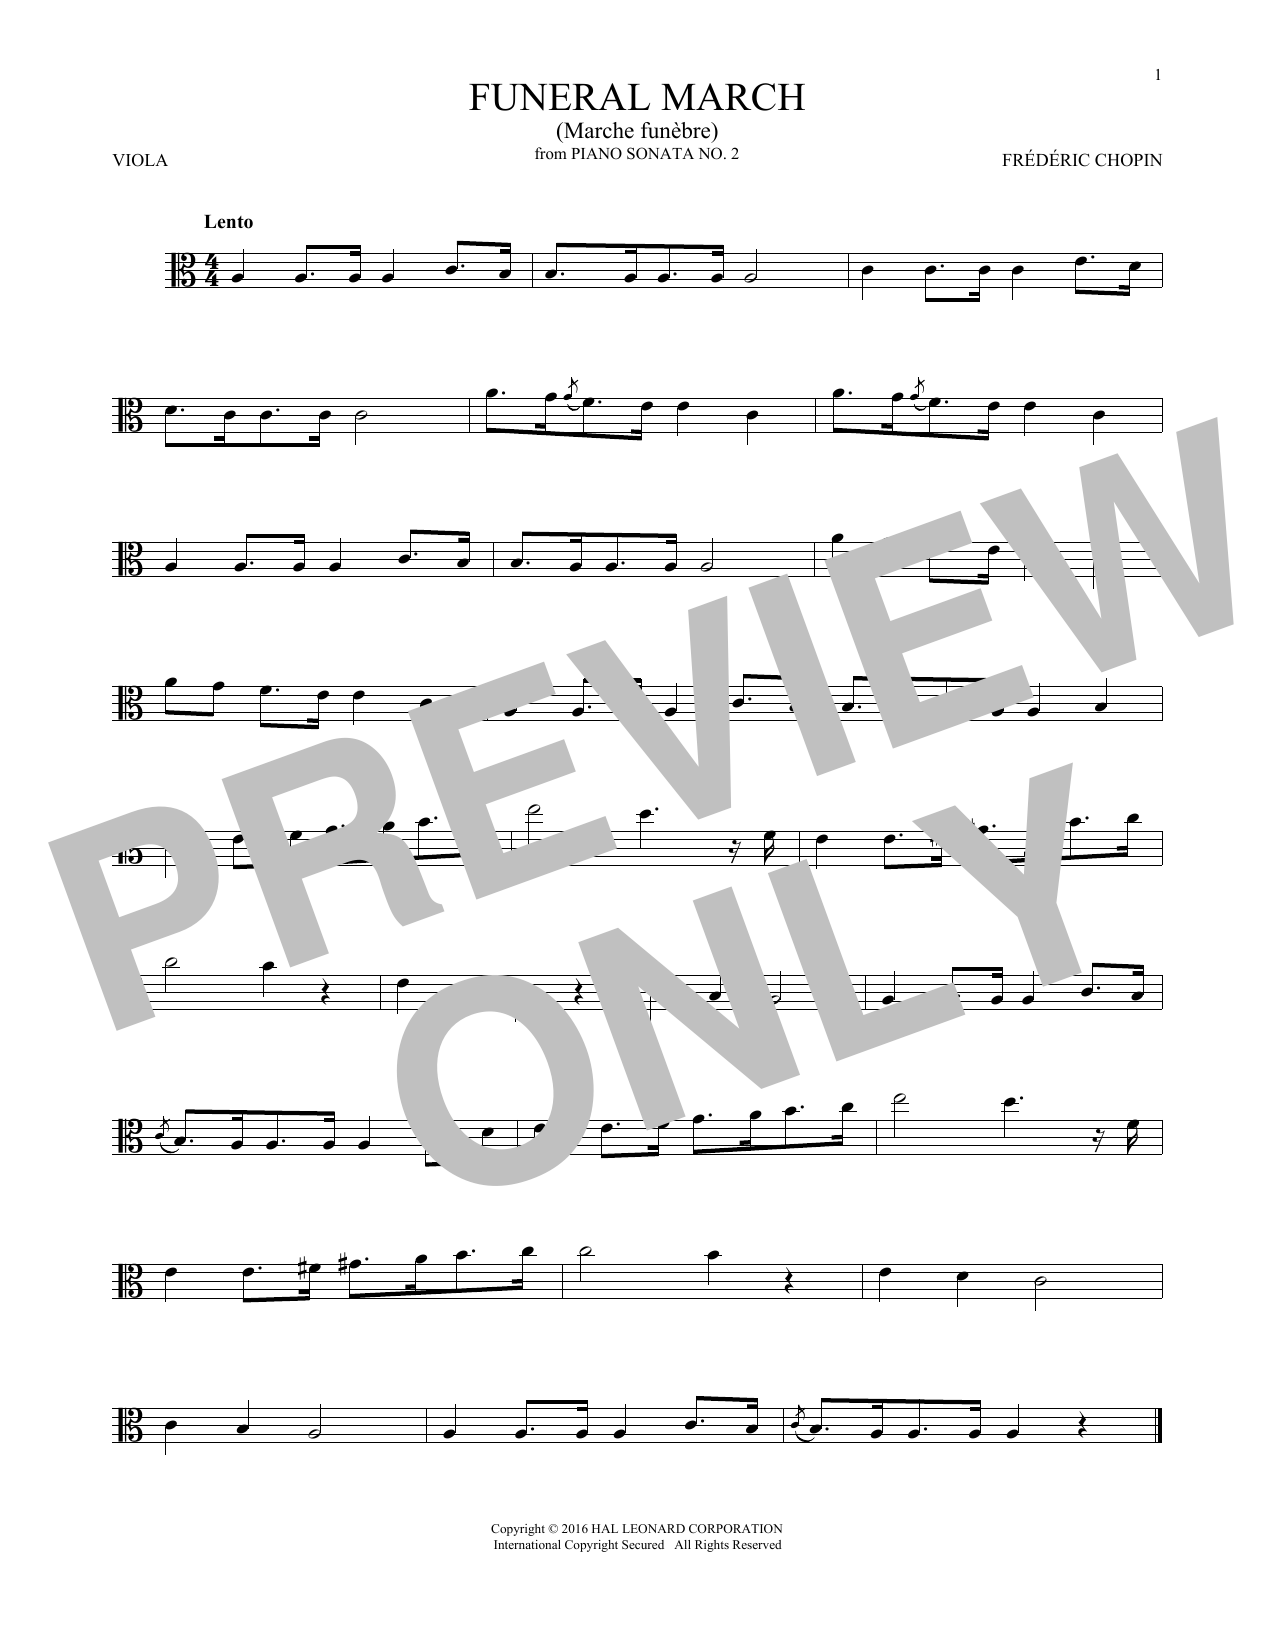 Download Frederic Chopin Funeral March Sheet Music